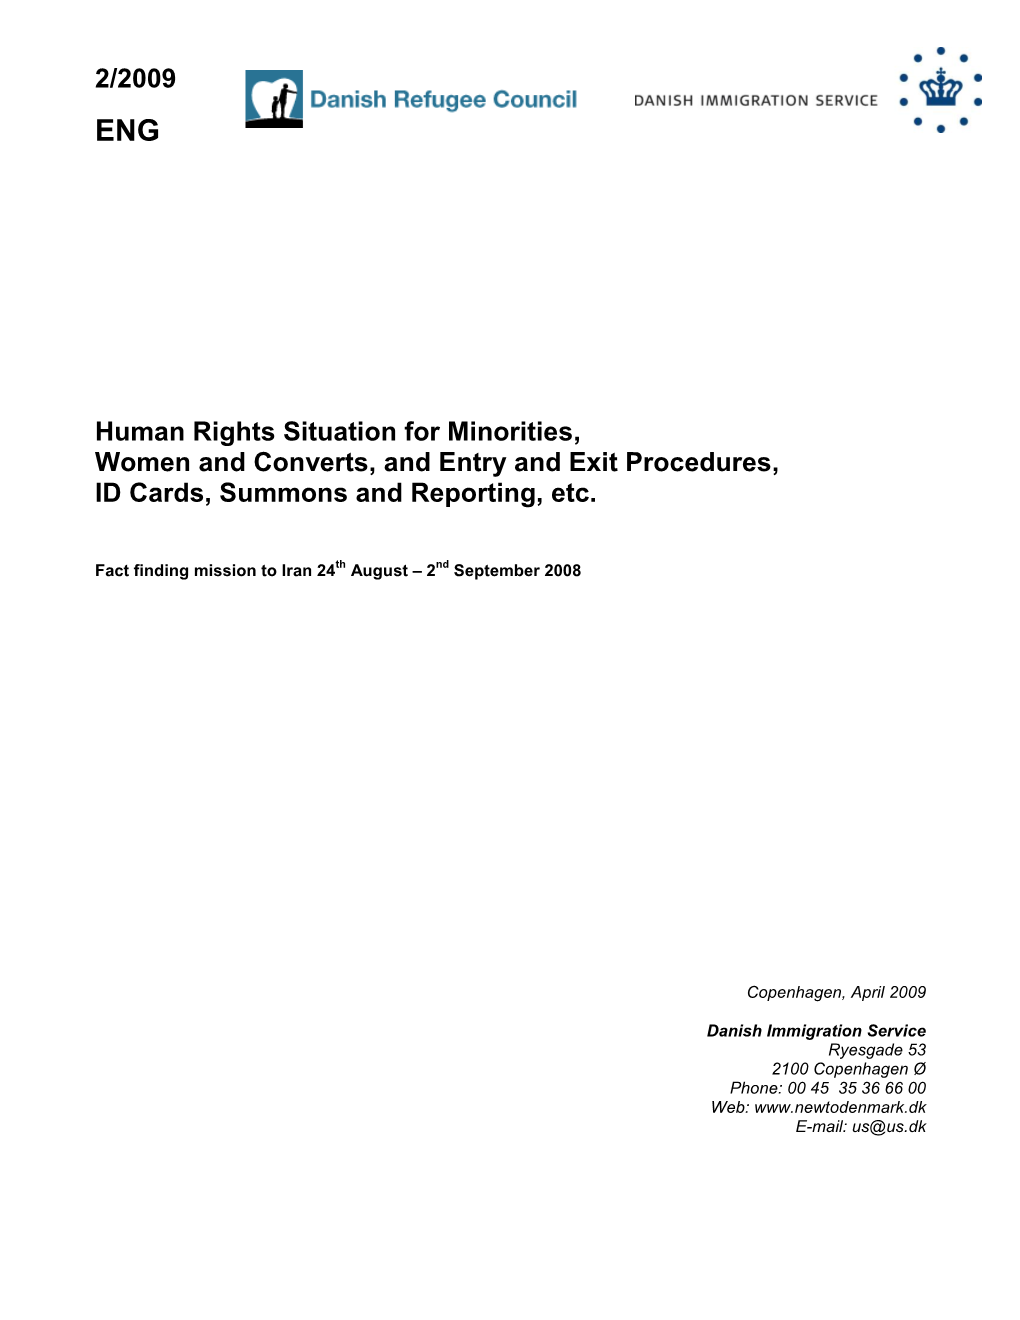 2/2009 Human Rights Situation for Minorities, Women and Converts